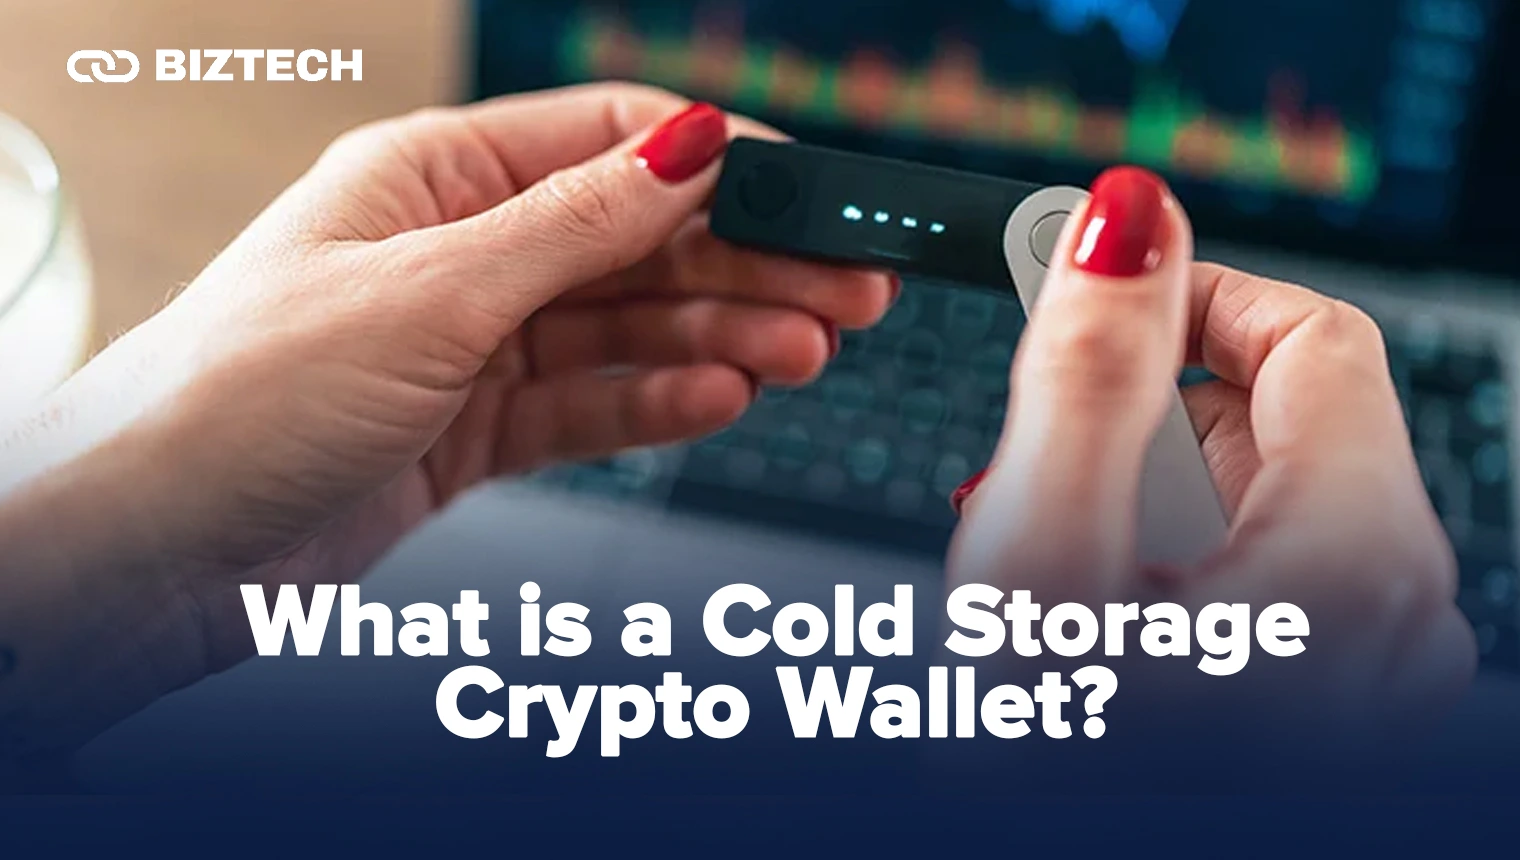 What is a Cold Storage Crypto Wallet